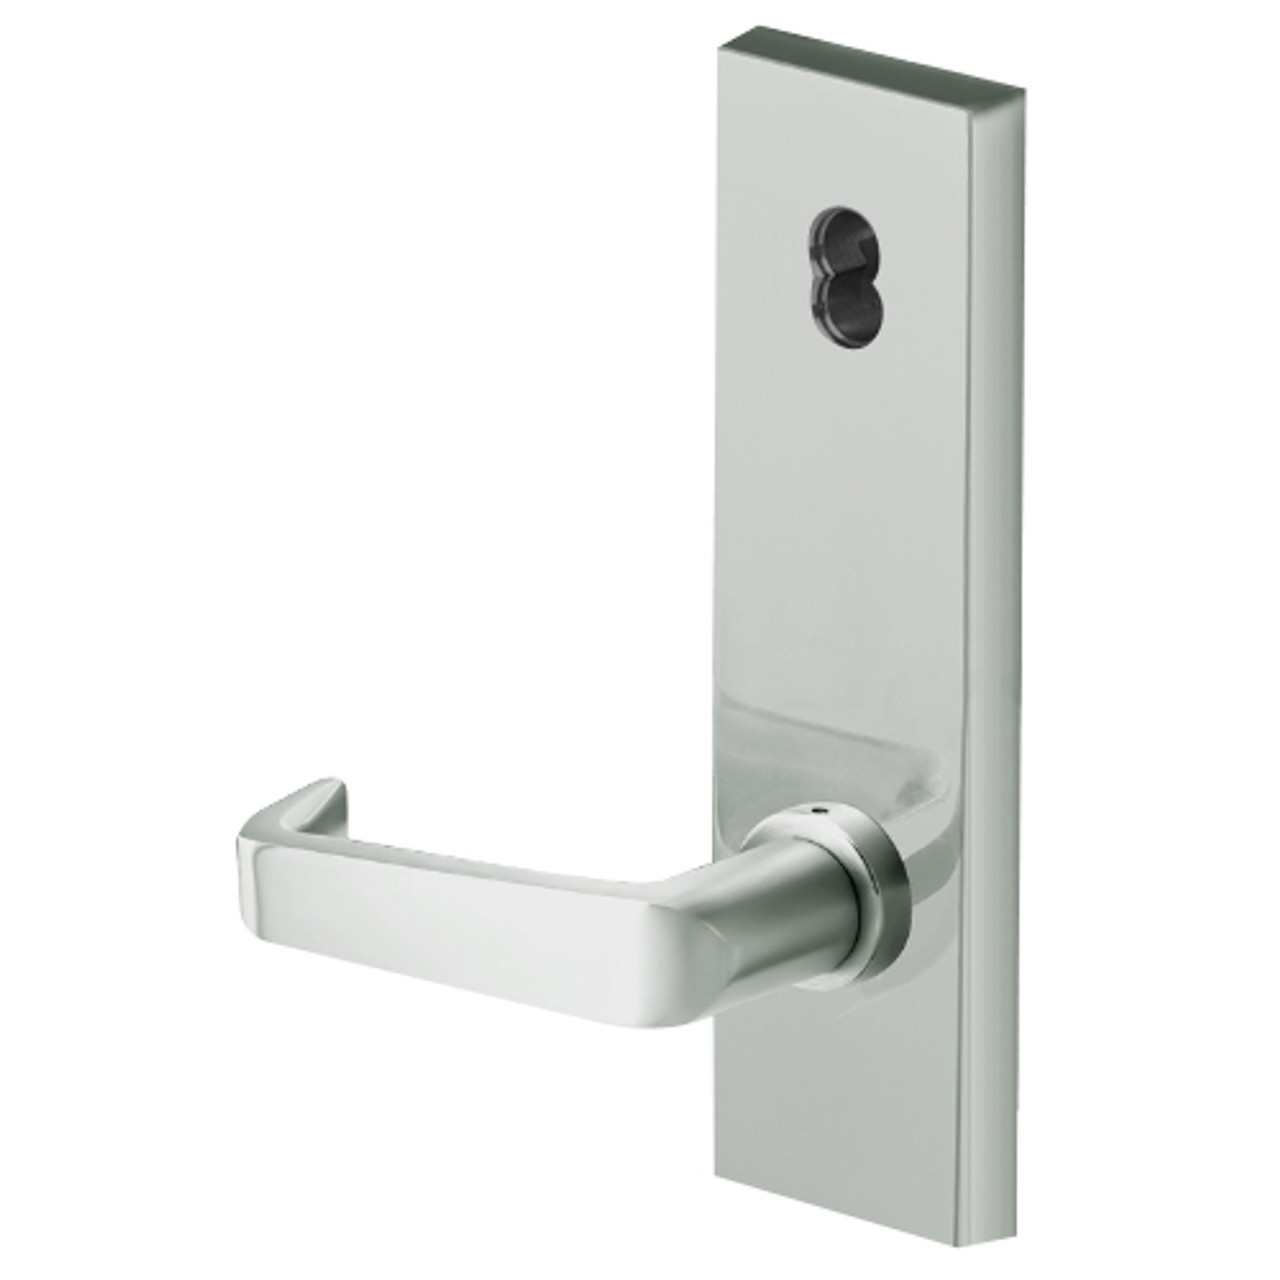 45HW7TWEL15N619 Best 40HW series Double Key Deadbolt Fail Safe Electromechanical Mortise Lever Lock with Contour w/ Angle Return Style in Satin Nickel